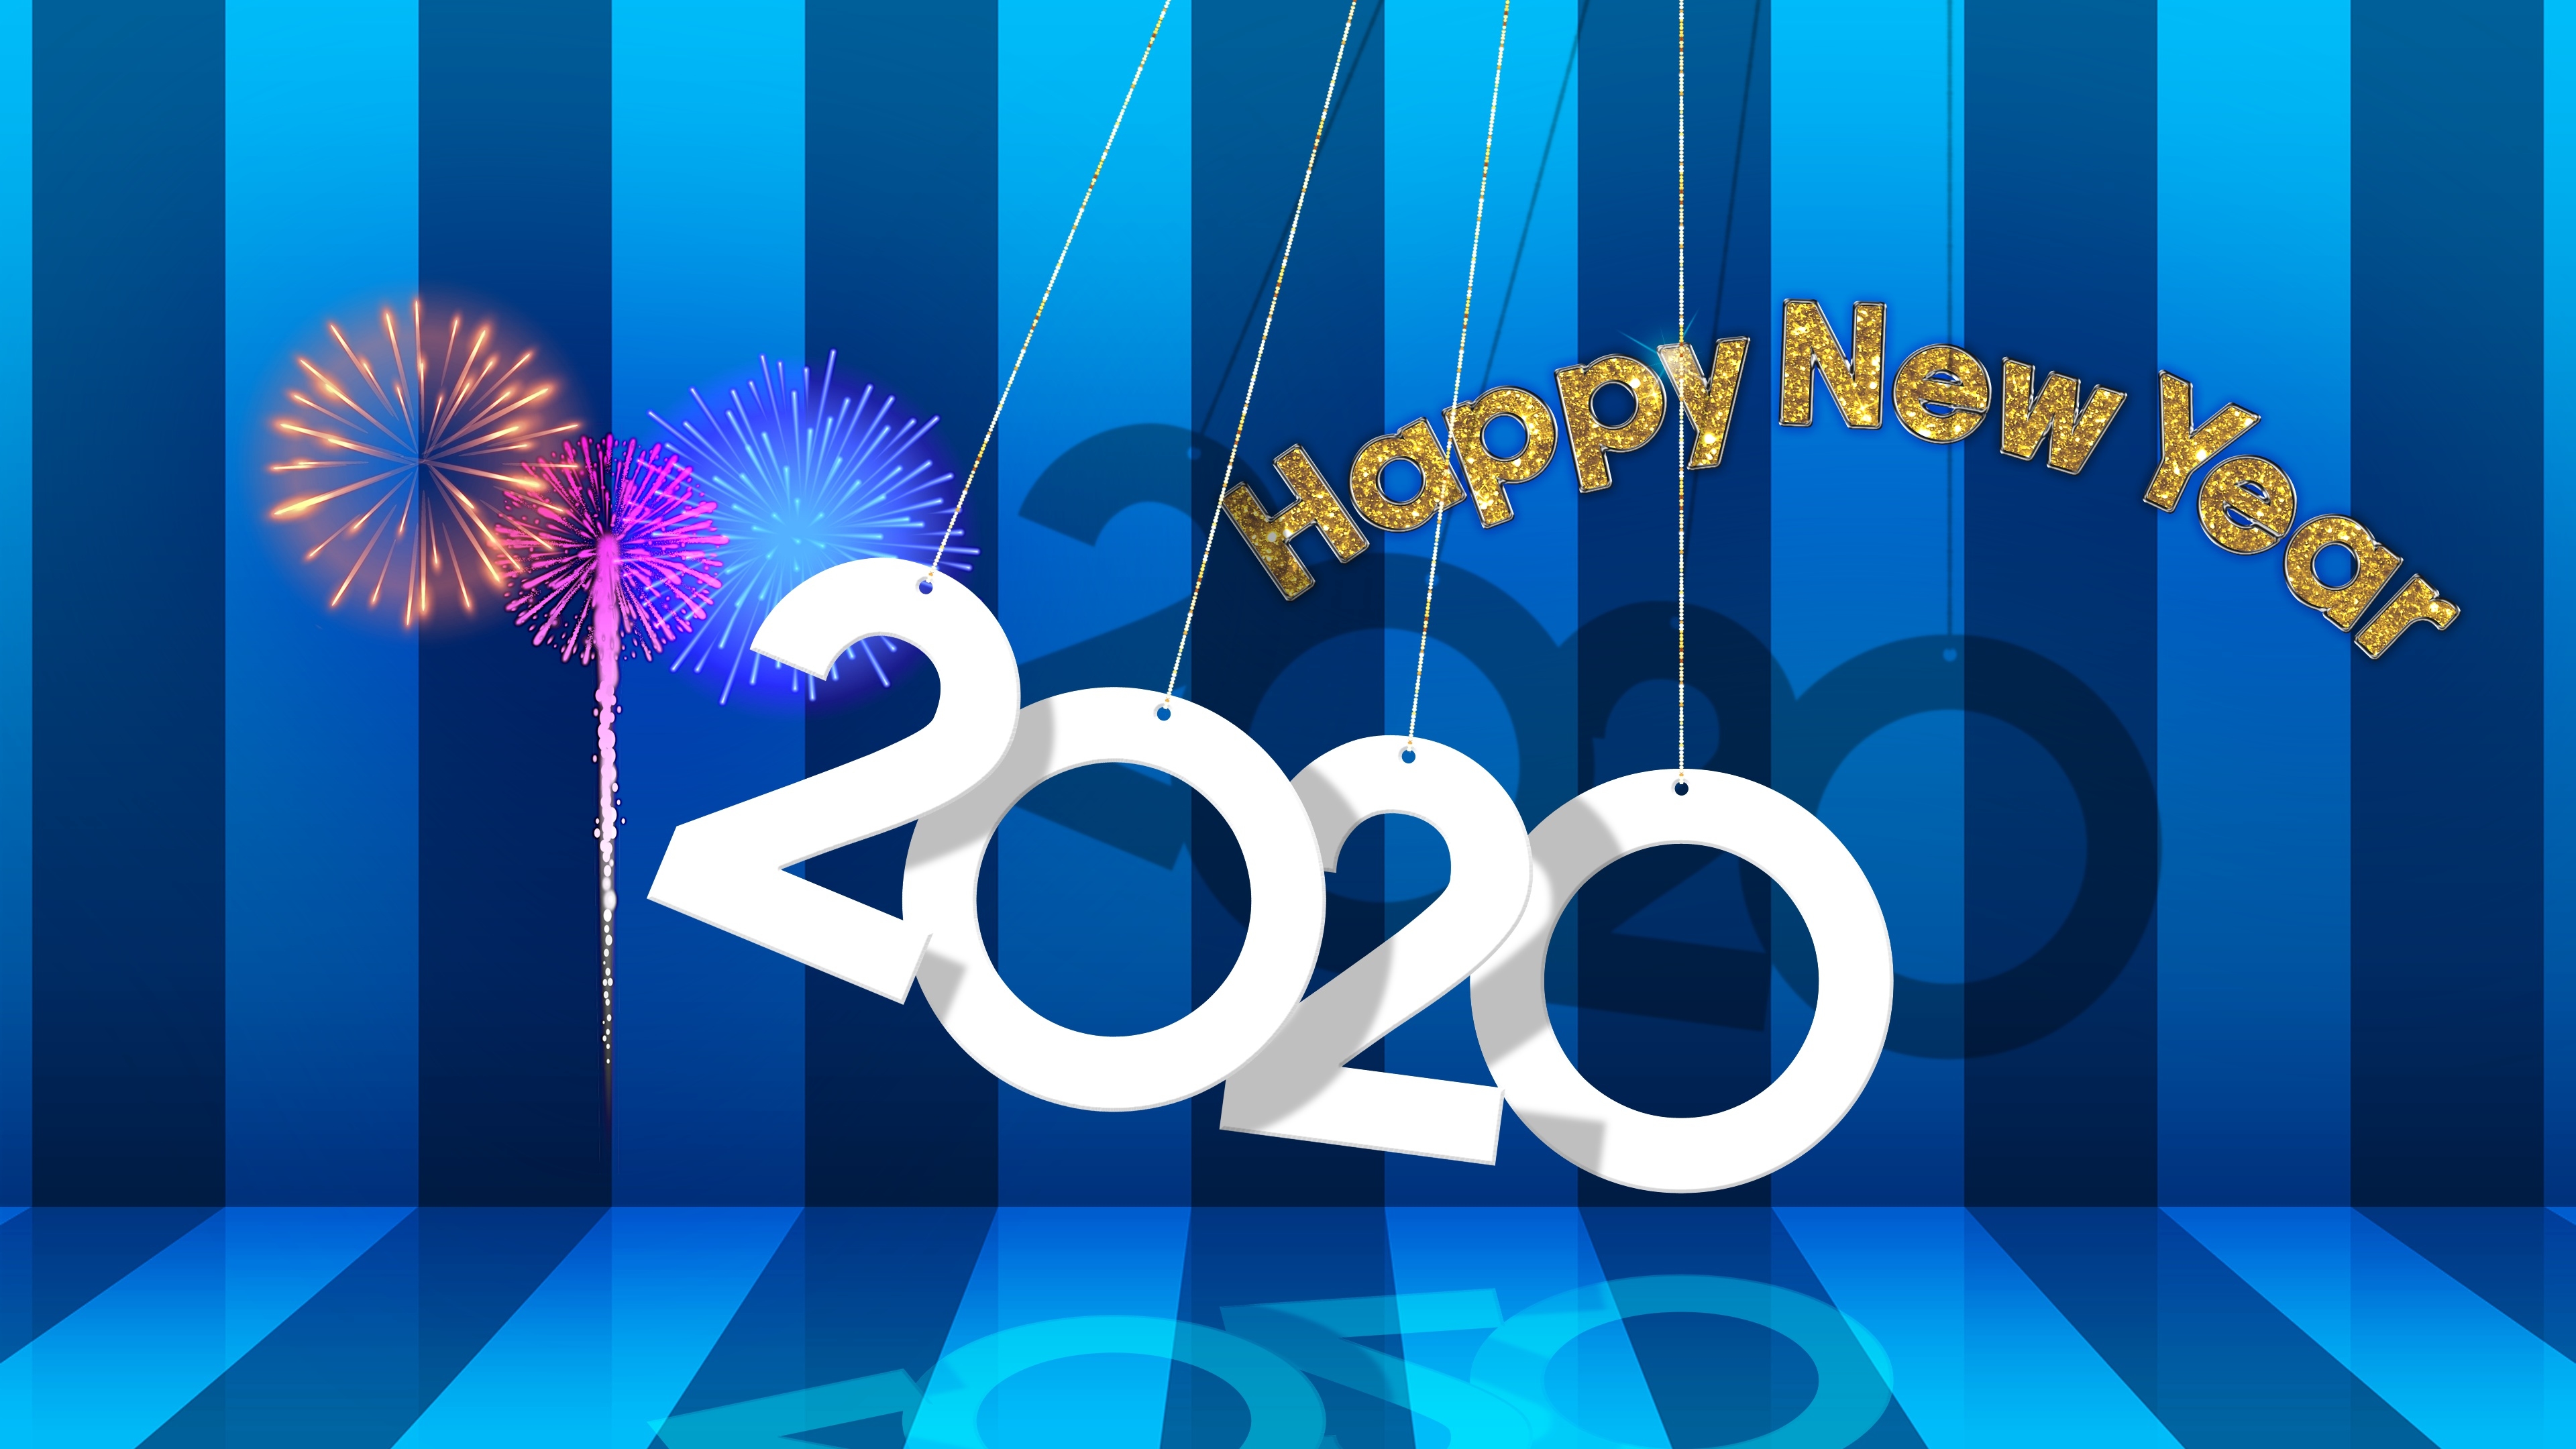 New Year 2020 Wallpaper, HD Other 4K Wallpaper, Image